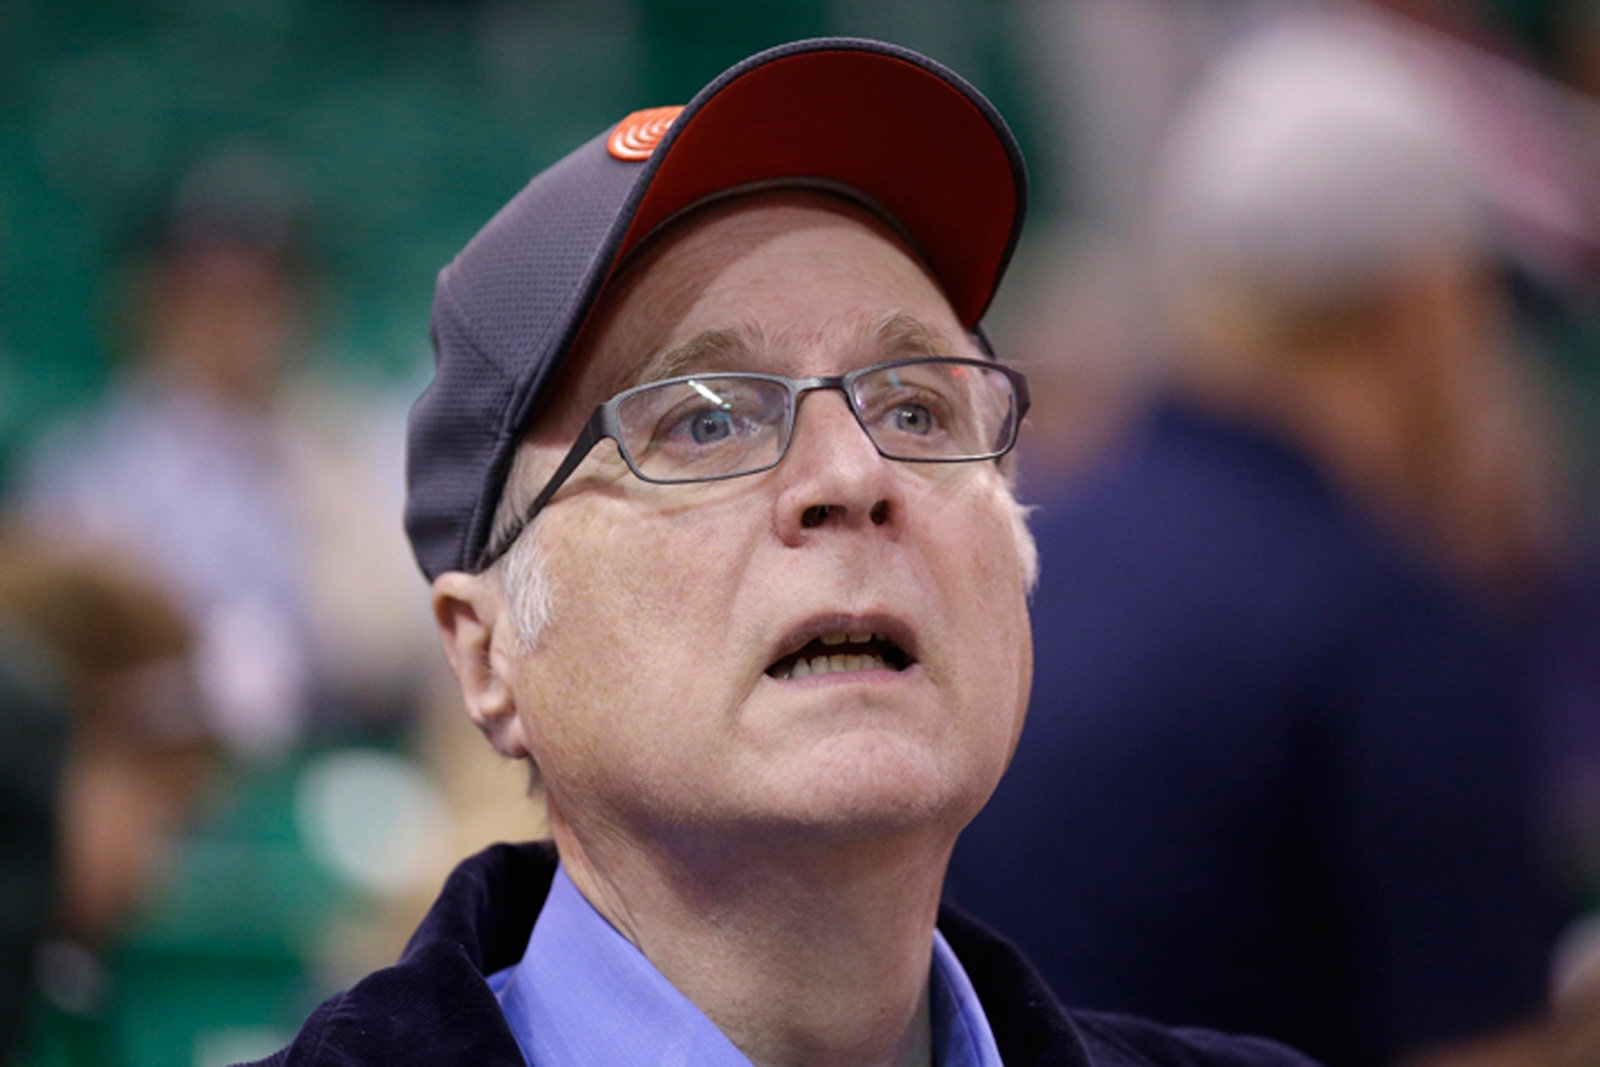 Microsoft co-founder Paul Allen dies from cancer at 65 | DeviceDaily.com